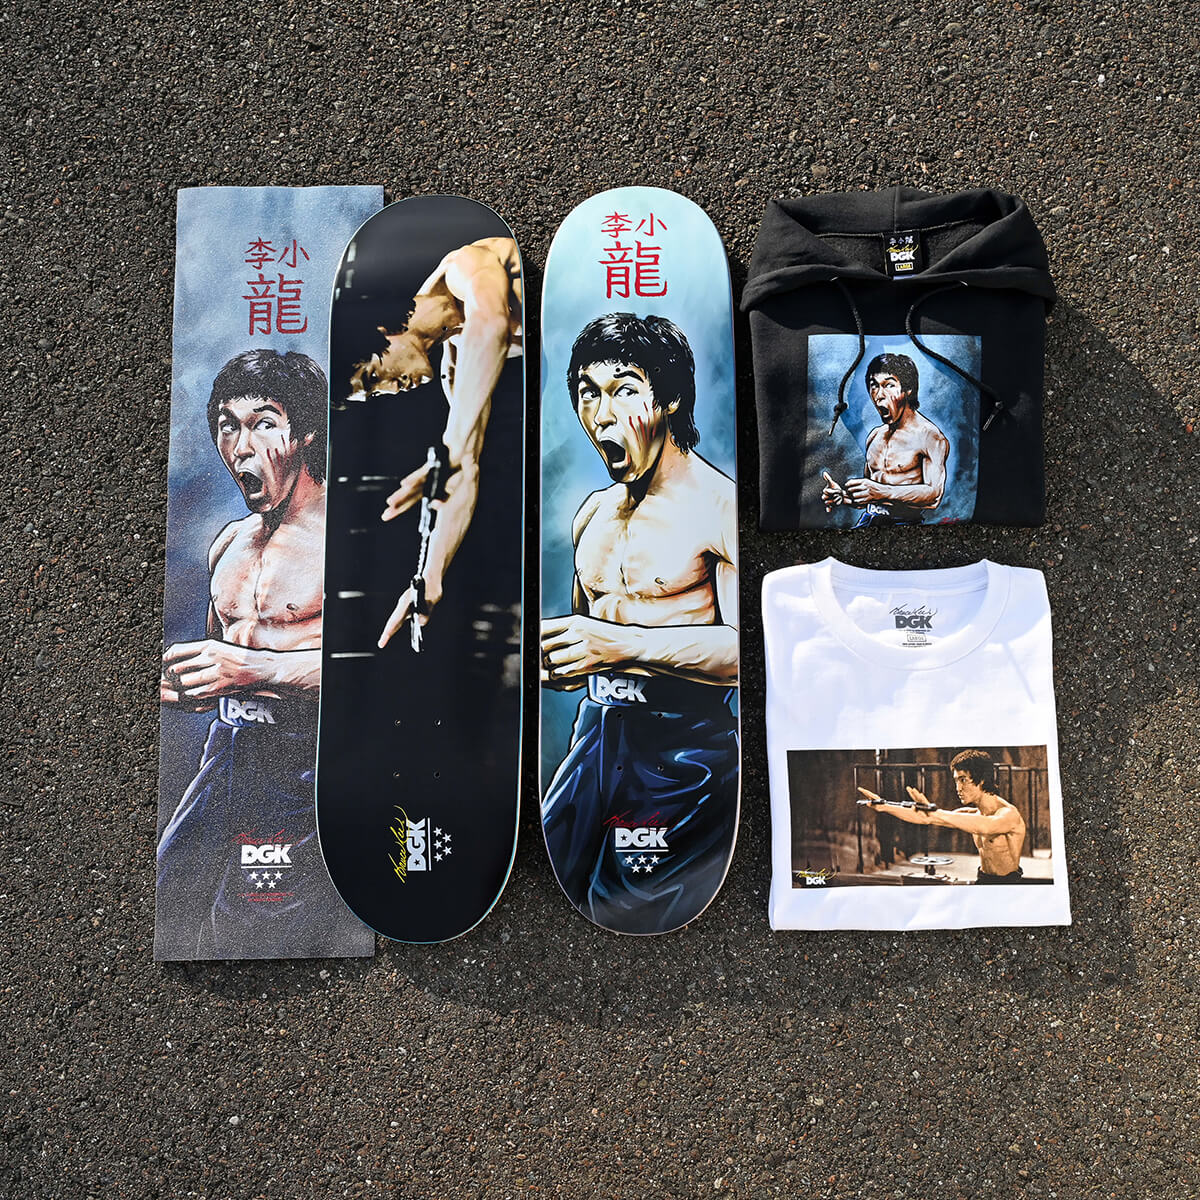 NEW COLLECTION - DGK X BRUCE LEE - THESE STYLES CAN KICK IT